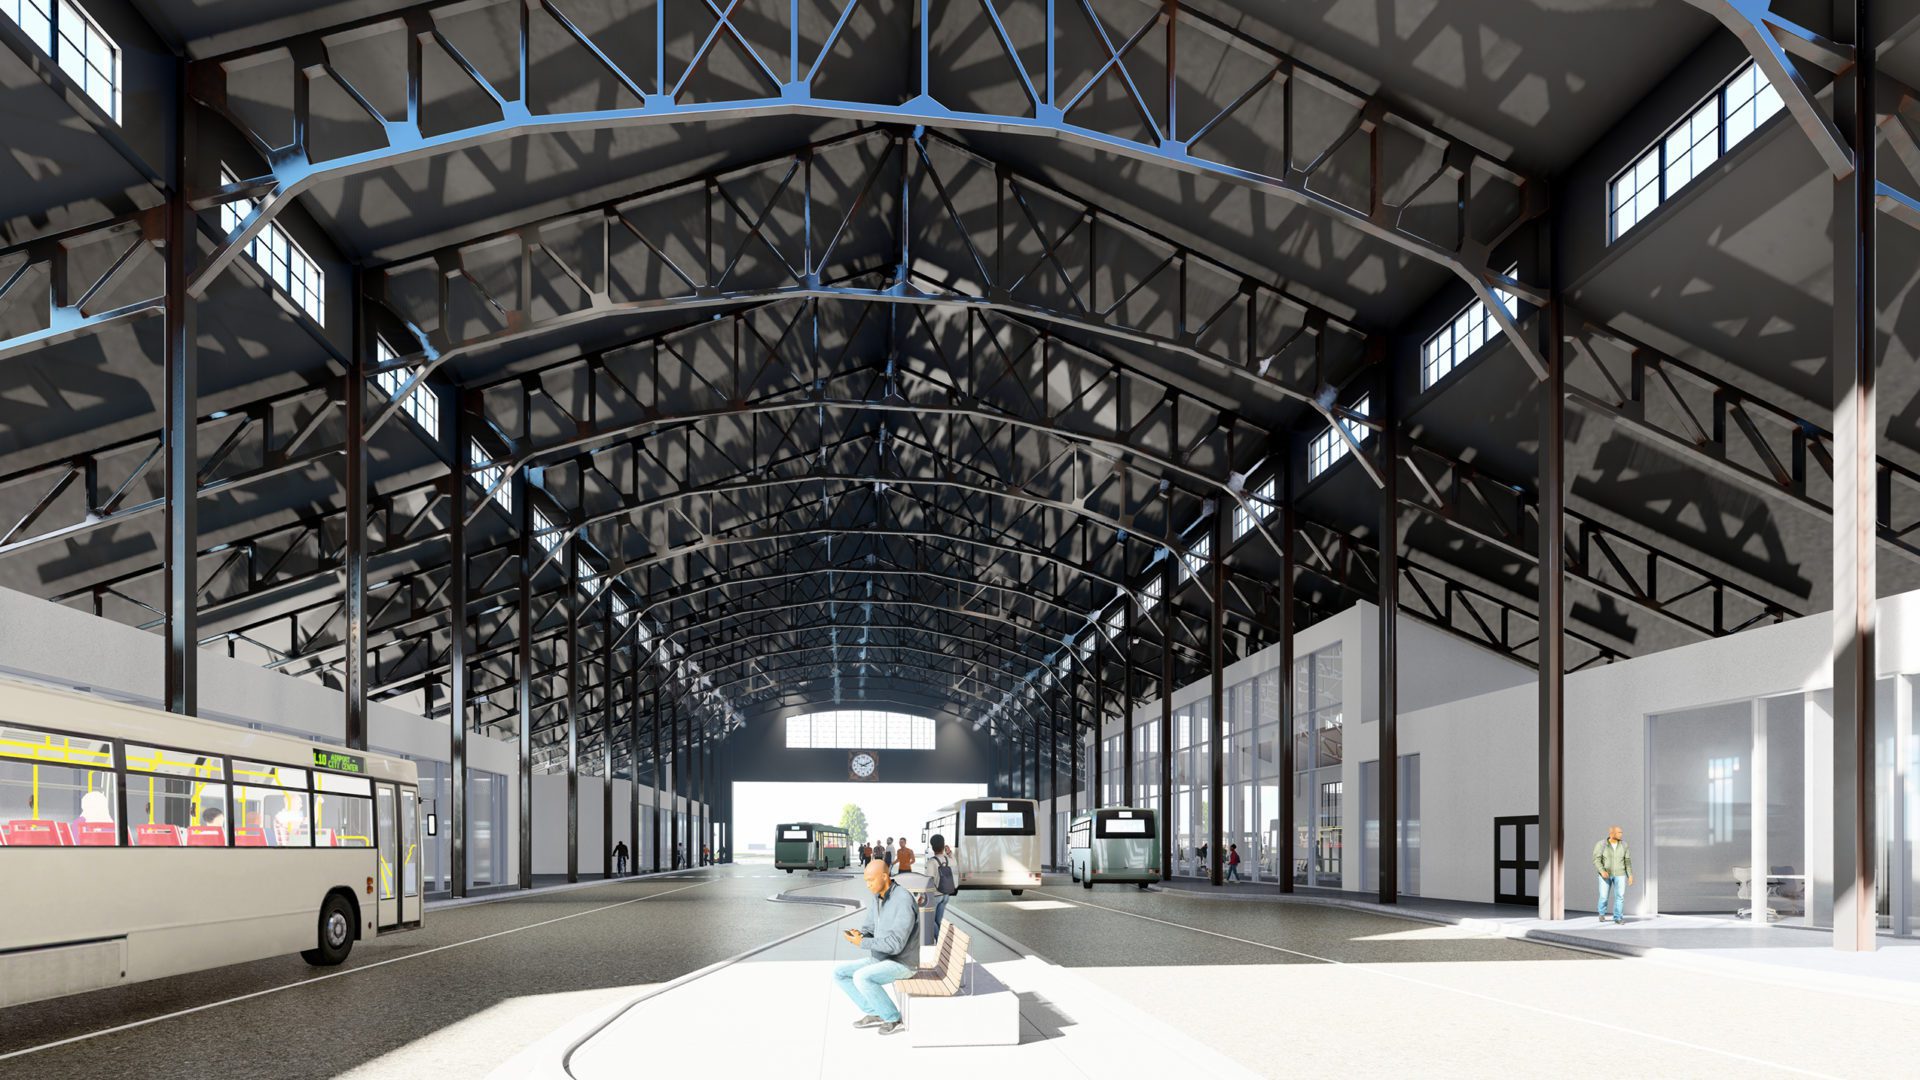 Indoor rendering of Transit Center and SmartBus Station Terminal with large hangar style ceilings